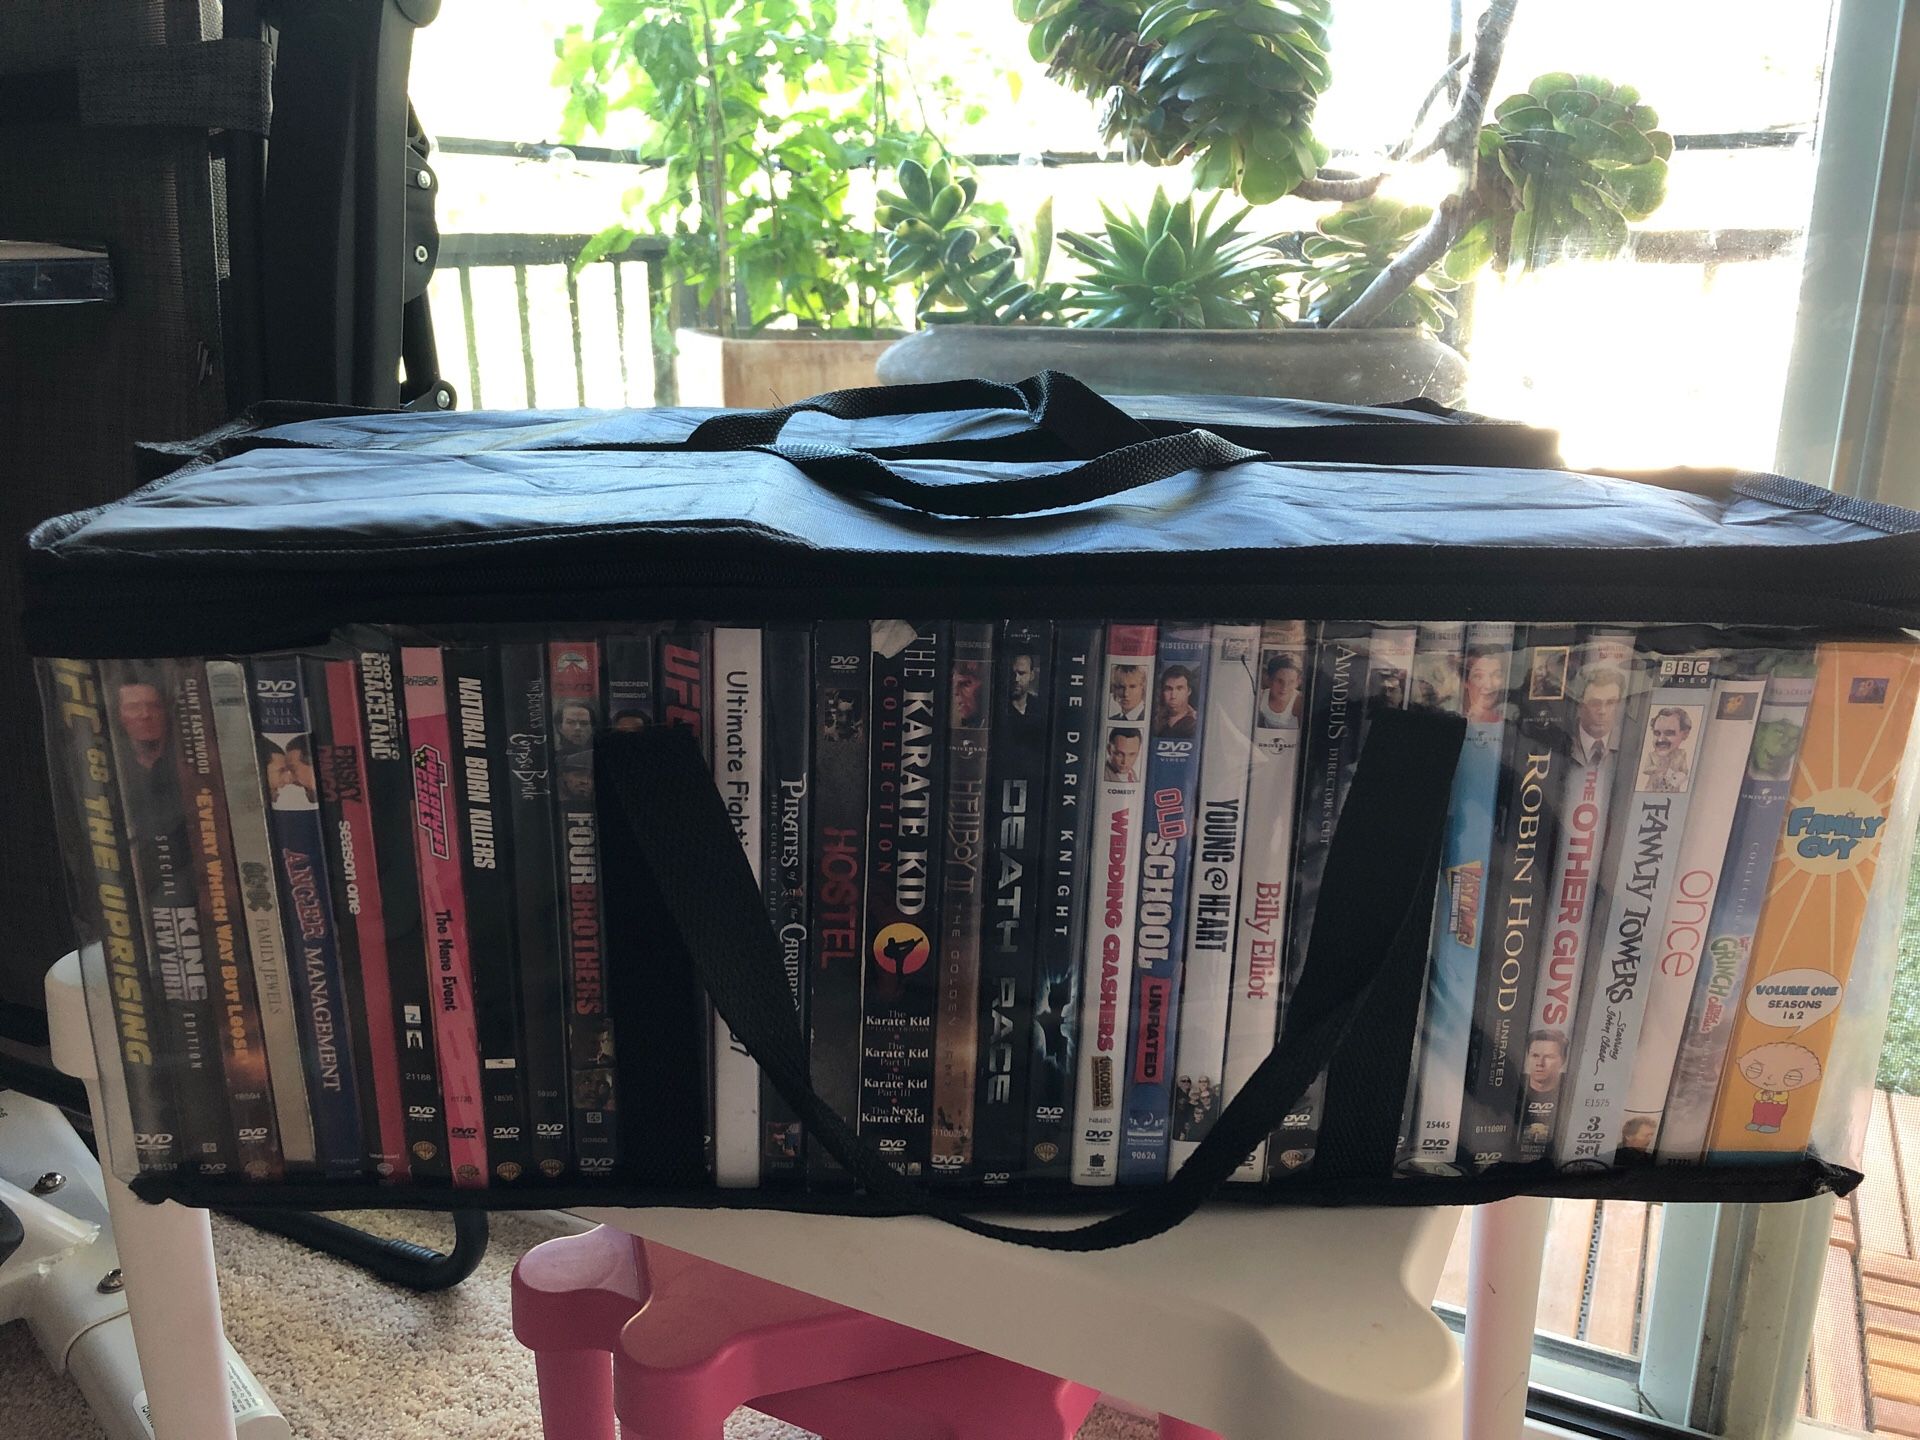 FREE DVDs. Please pickup in San Mateo.